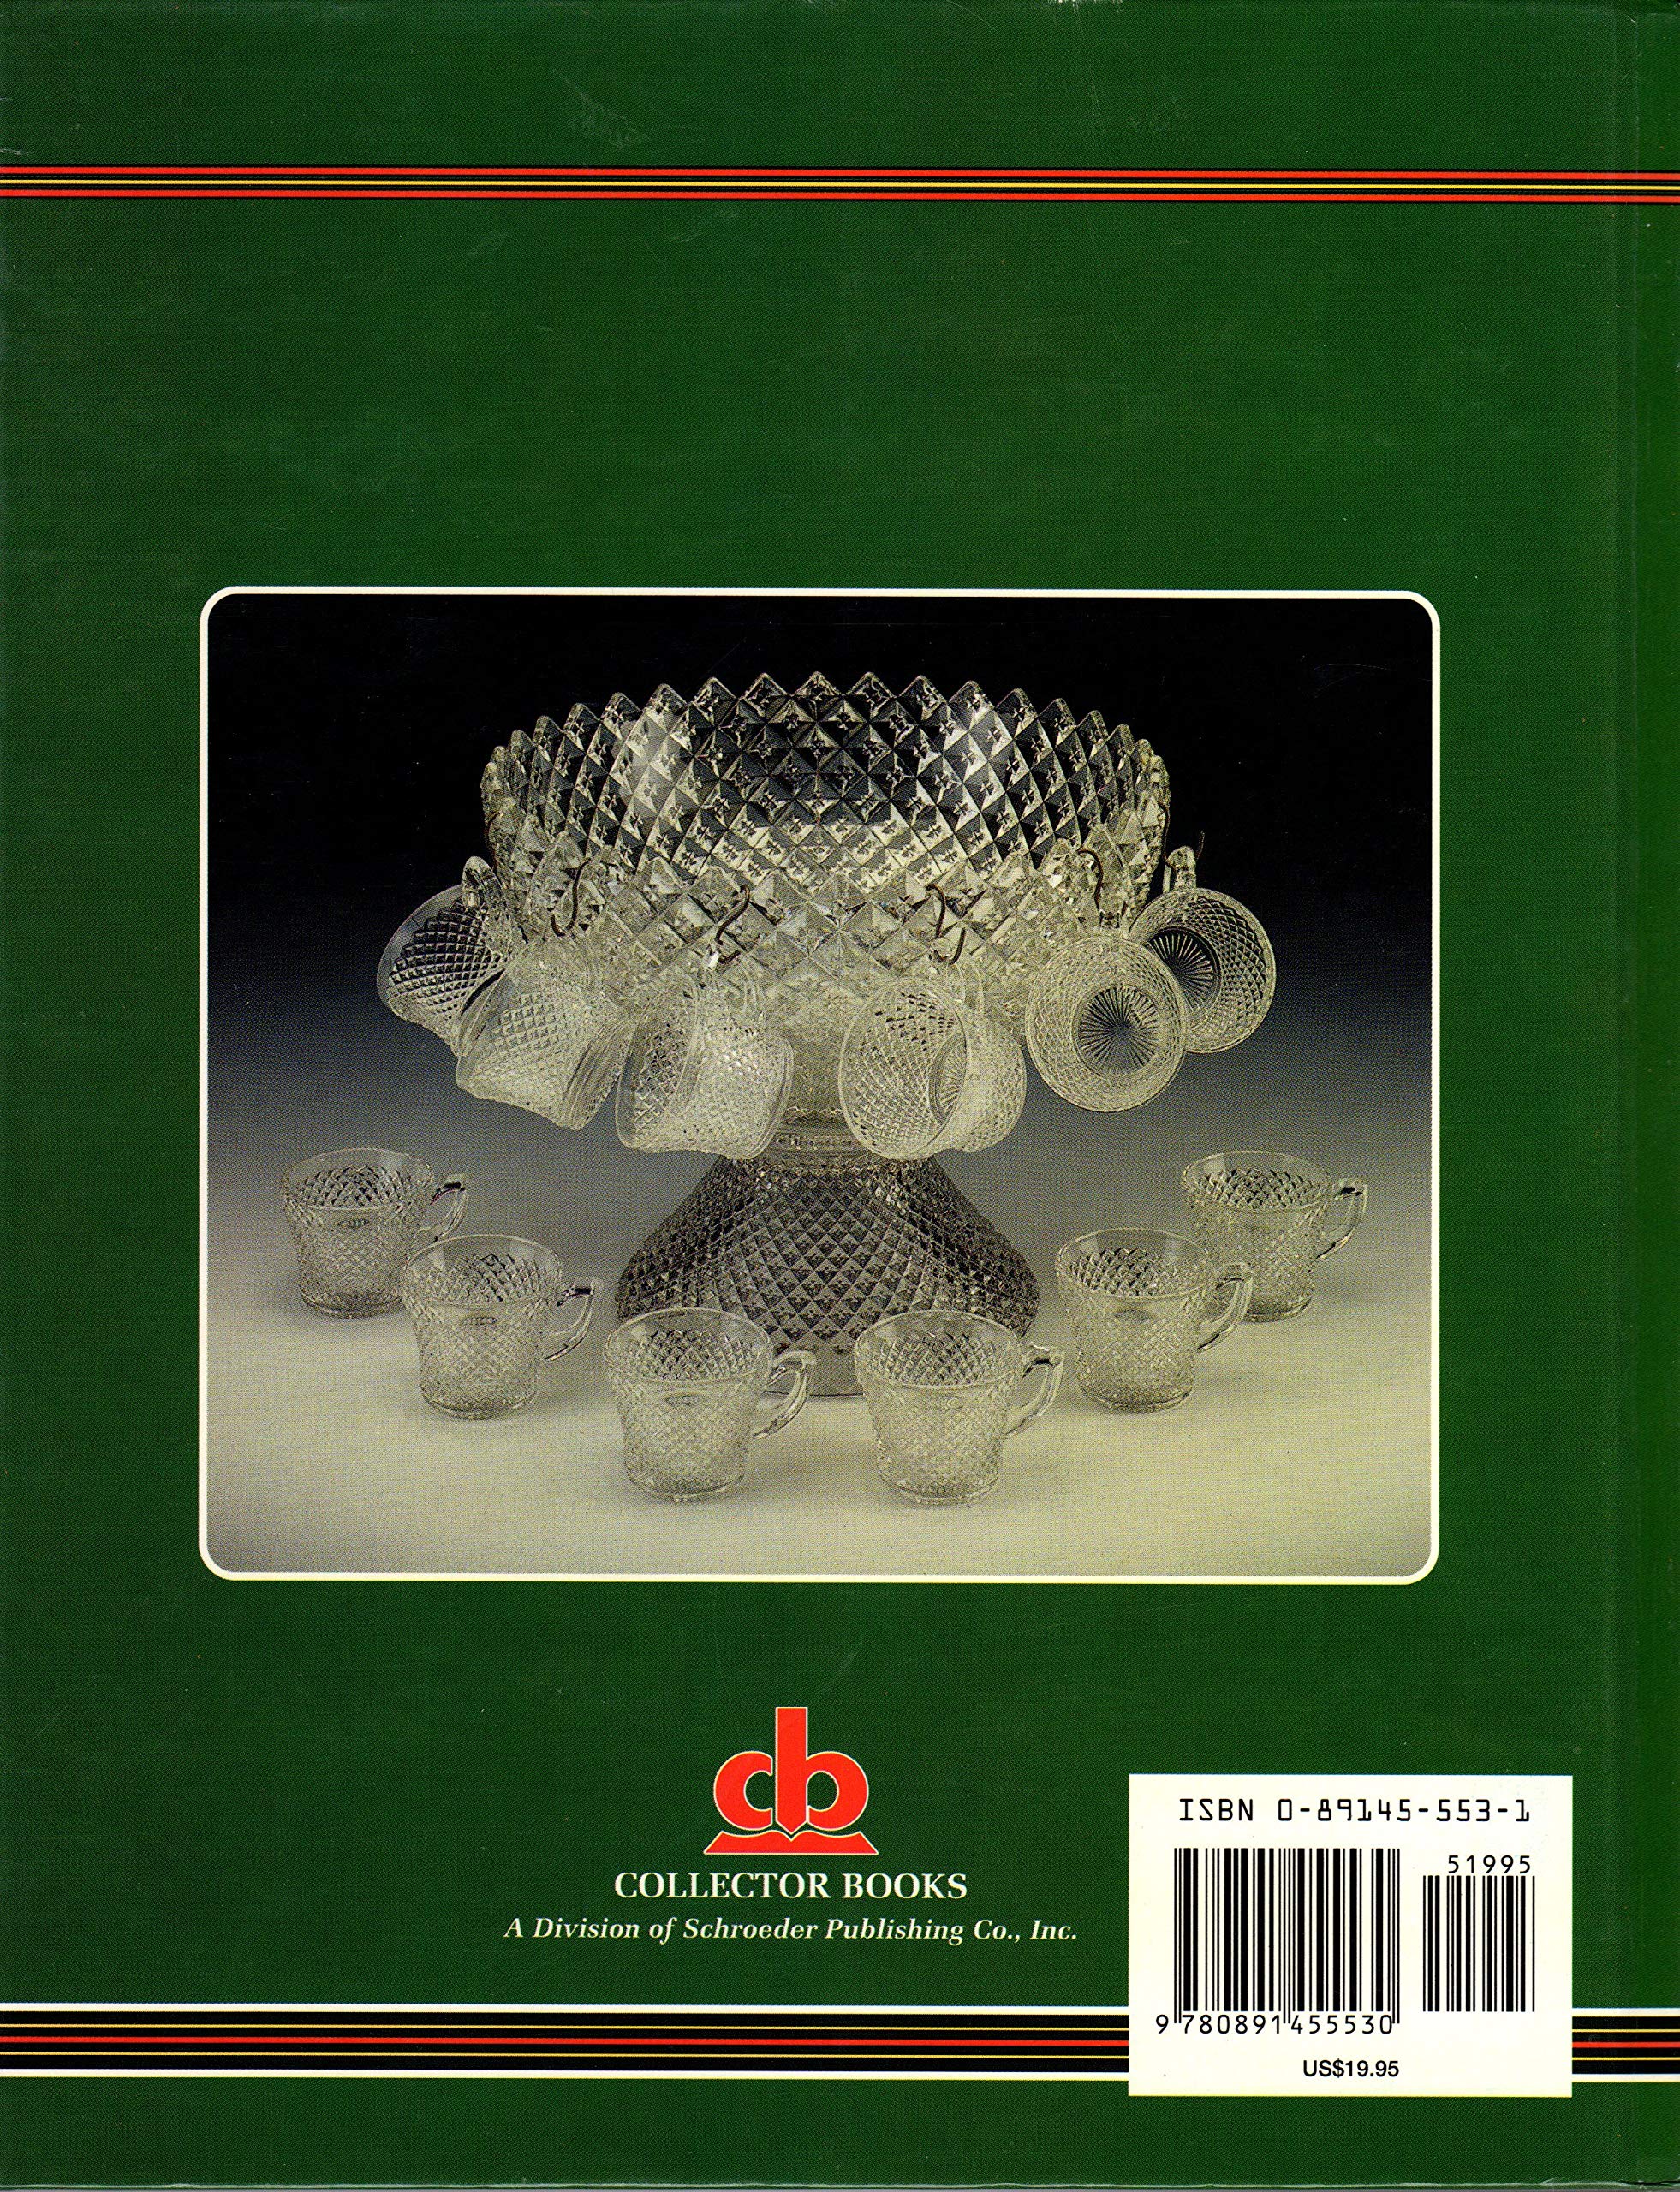 Collectible Glassware from the 40's, 50's, 60's: An Illustrated Value Guide, Second Edition